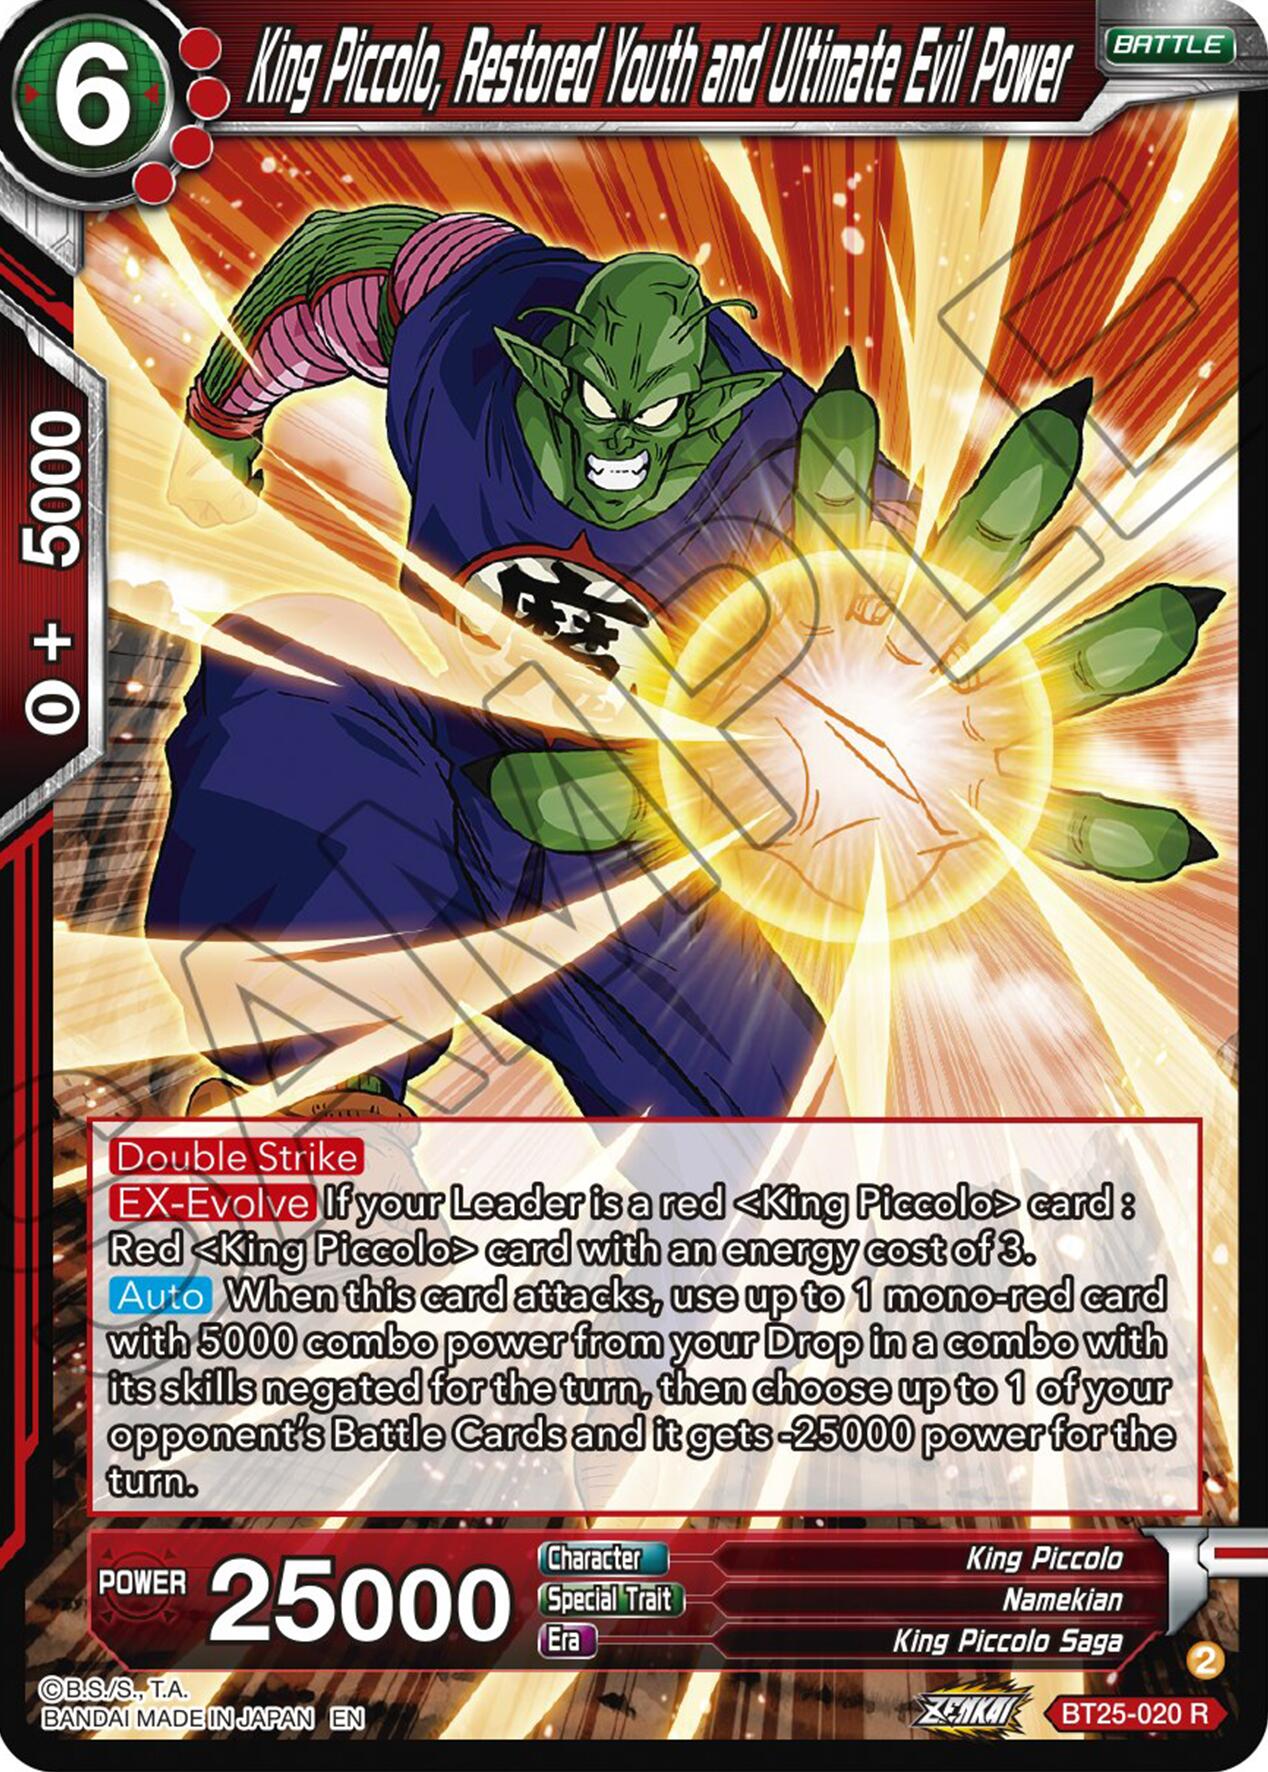 King Piccolo, Restored Youth and Ultimate Evil Power (BT25-020) [Legend of the Dragon Balls] | Sanctuary Gaming